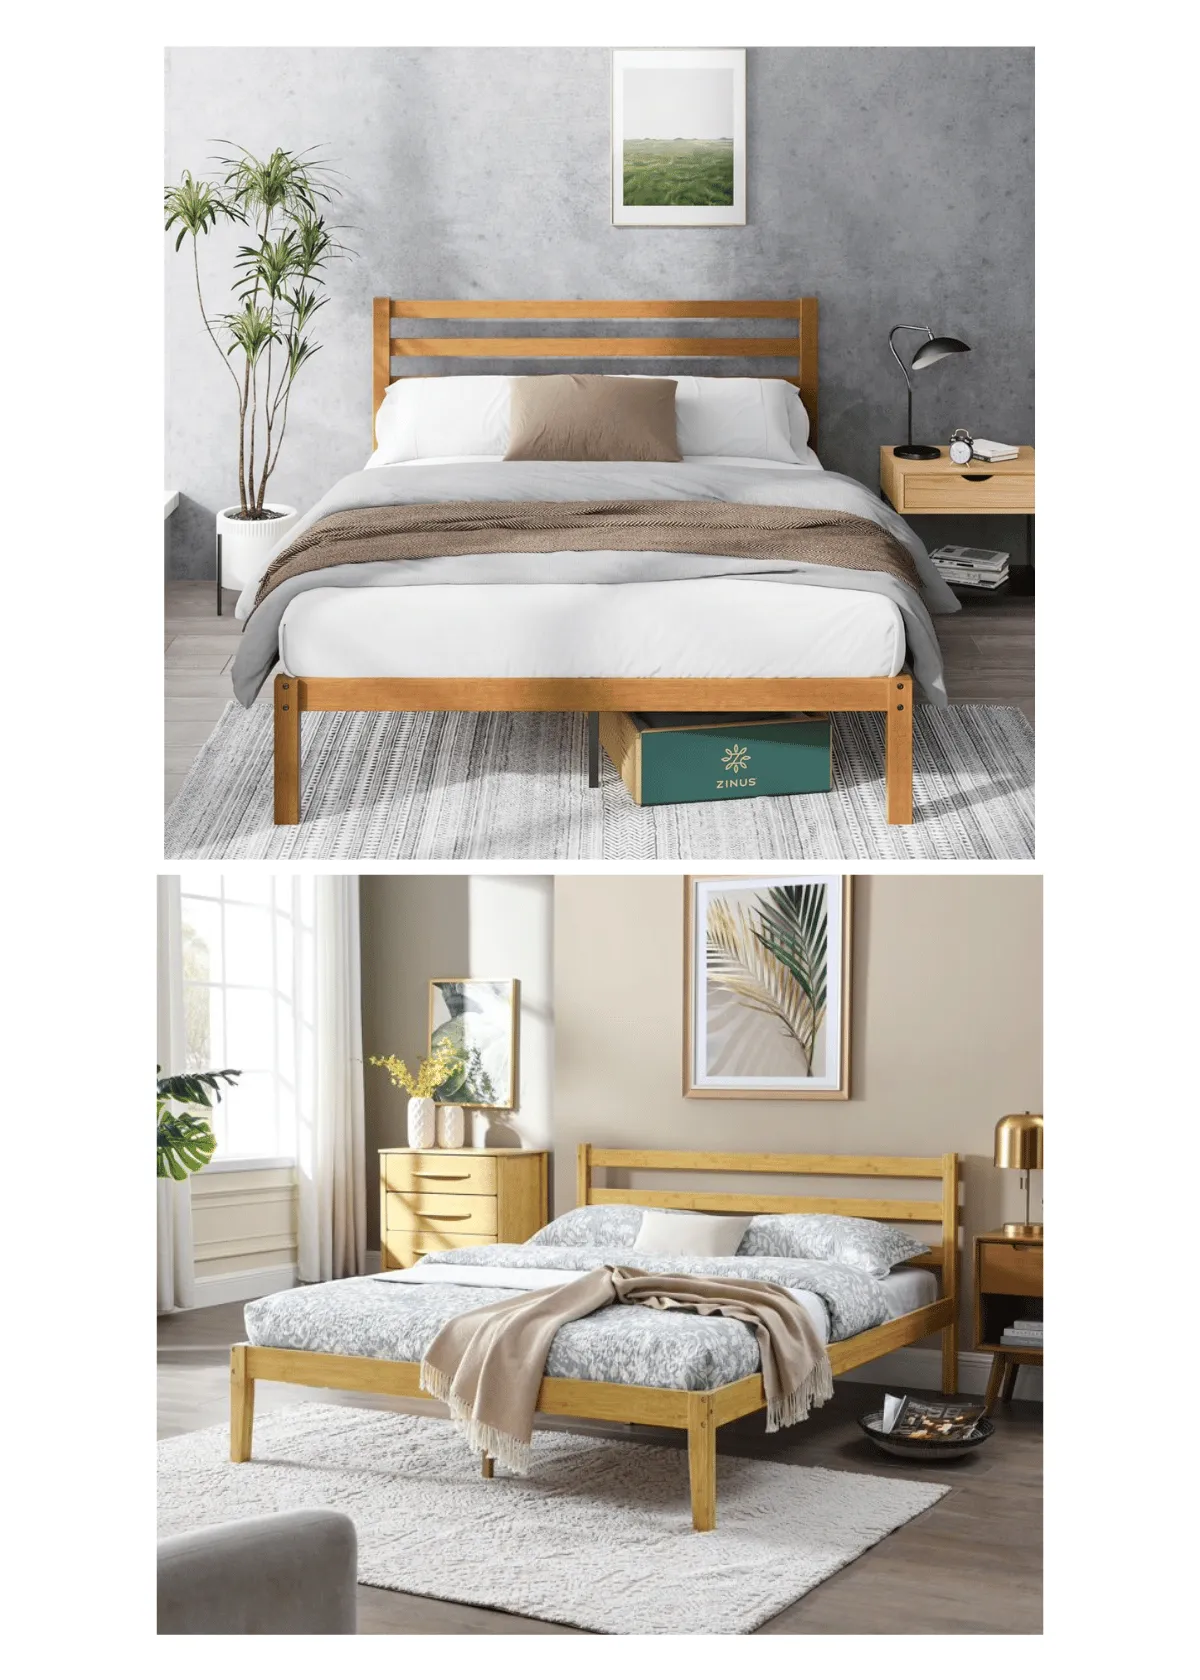 "Is a Bamboo Bed Frame the Best Eco-Friendly Choice? Find Out"